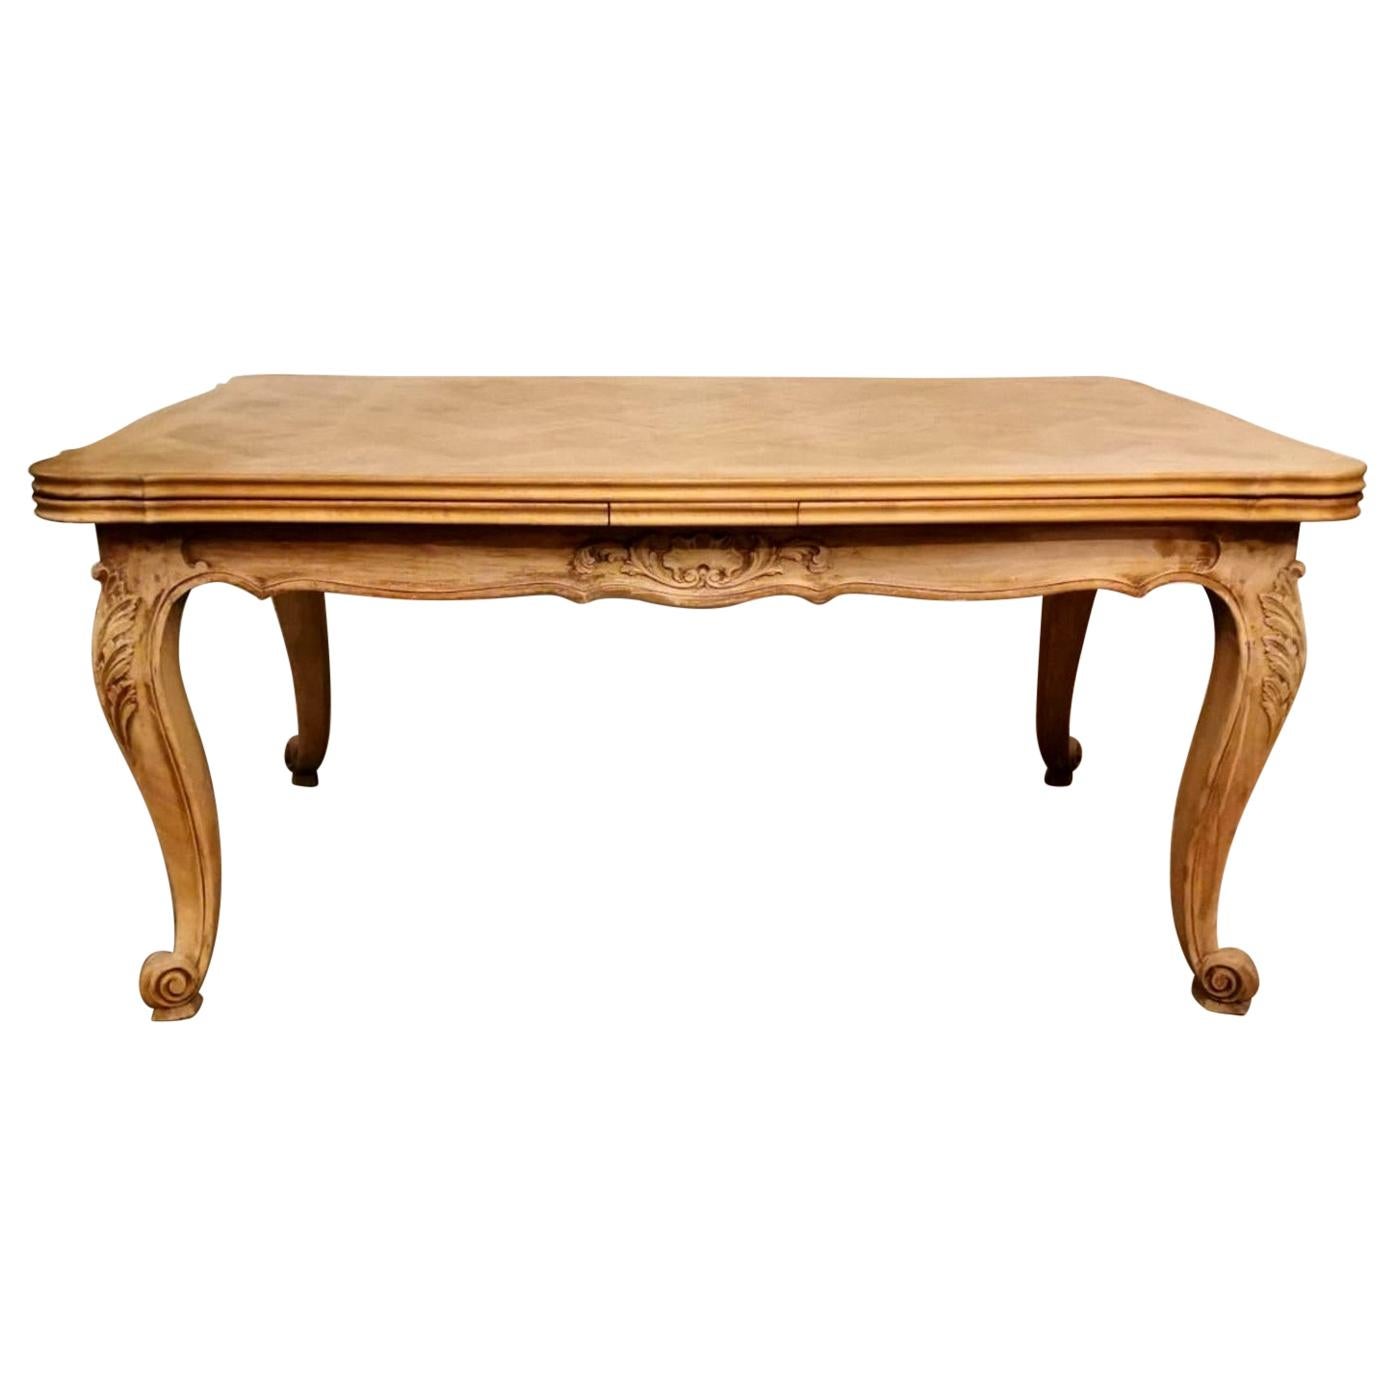 Provençal Extending Dining Table in Wood Raw Finish, France